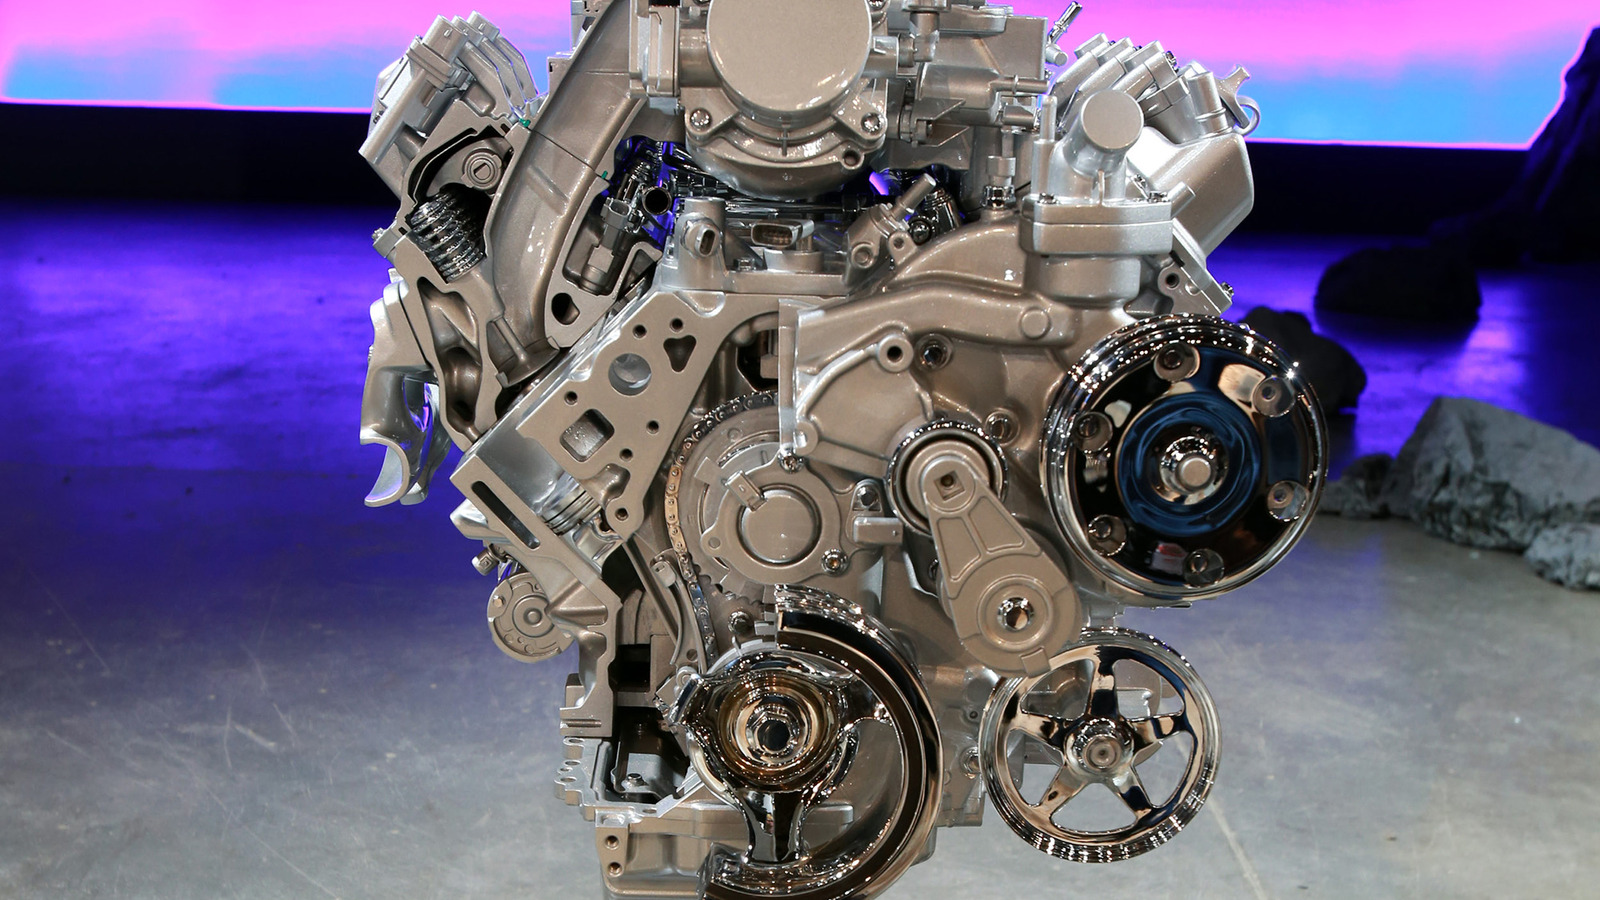 GM 5.3 Liter V8 Ecotec3 L83 Engine: Specs, Performance, and Everything You Need to Know!